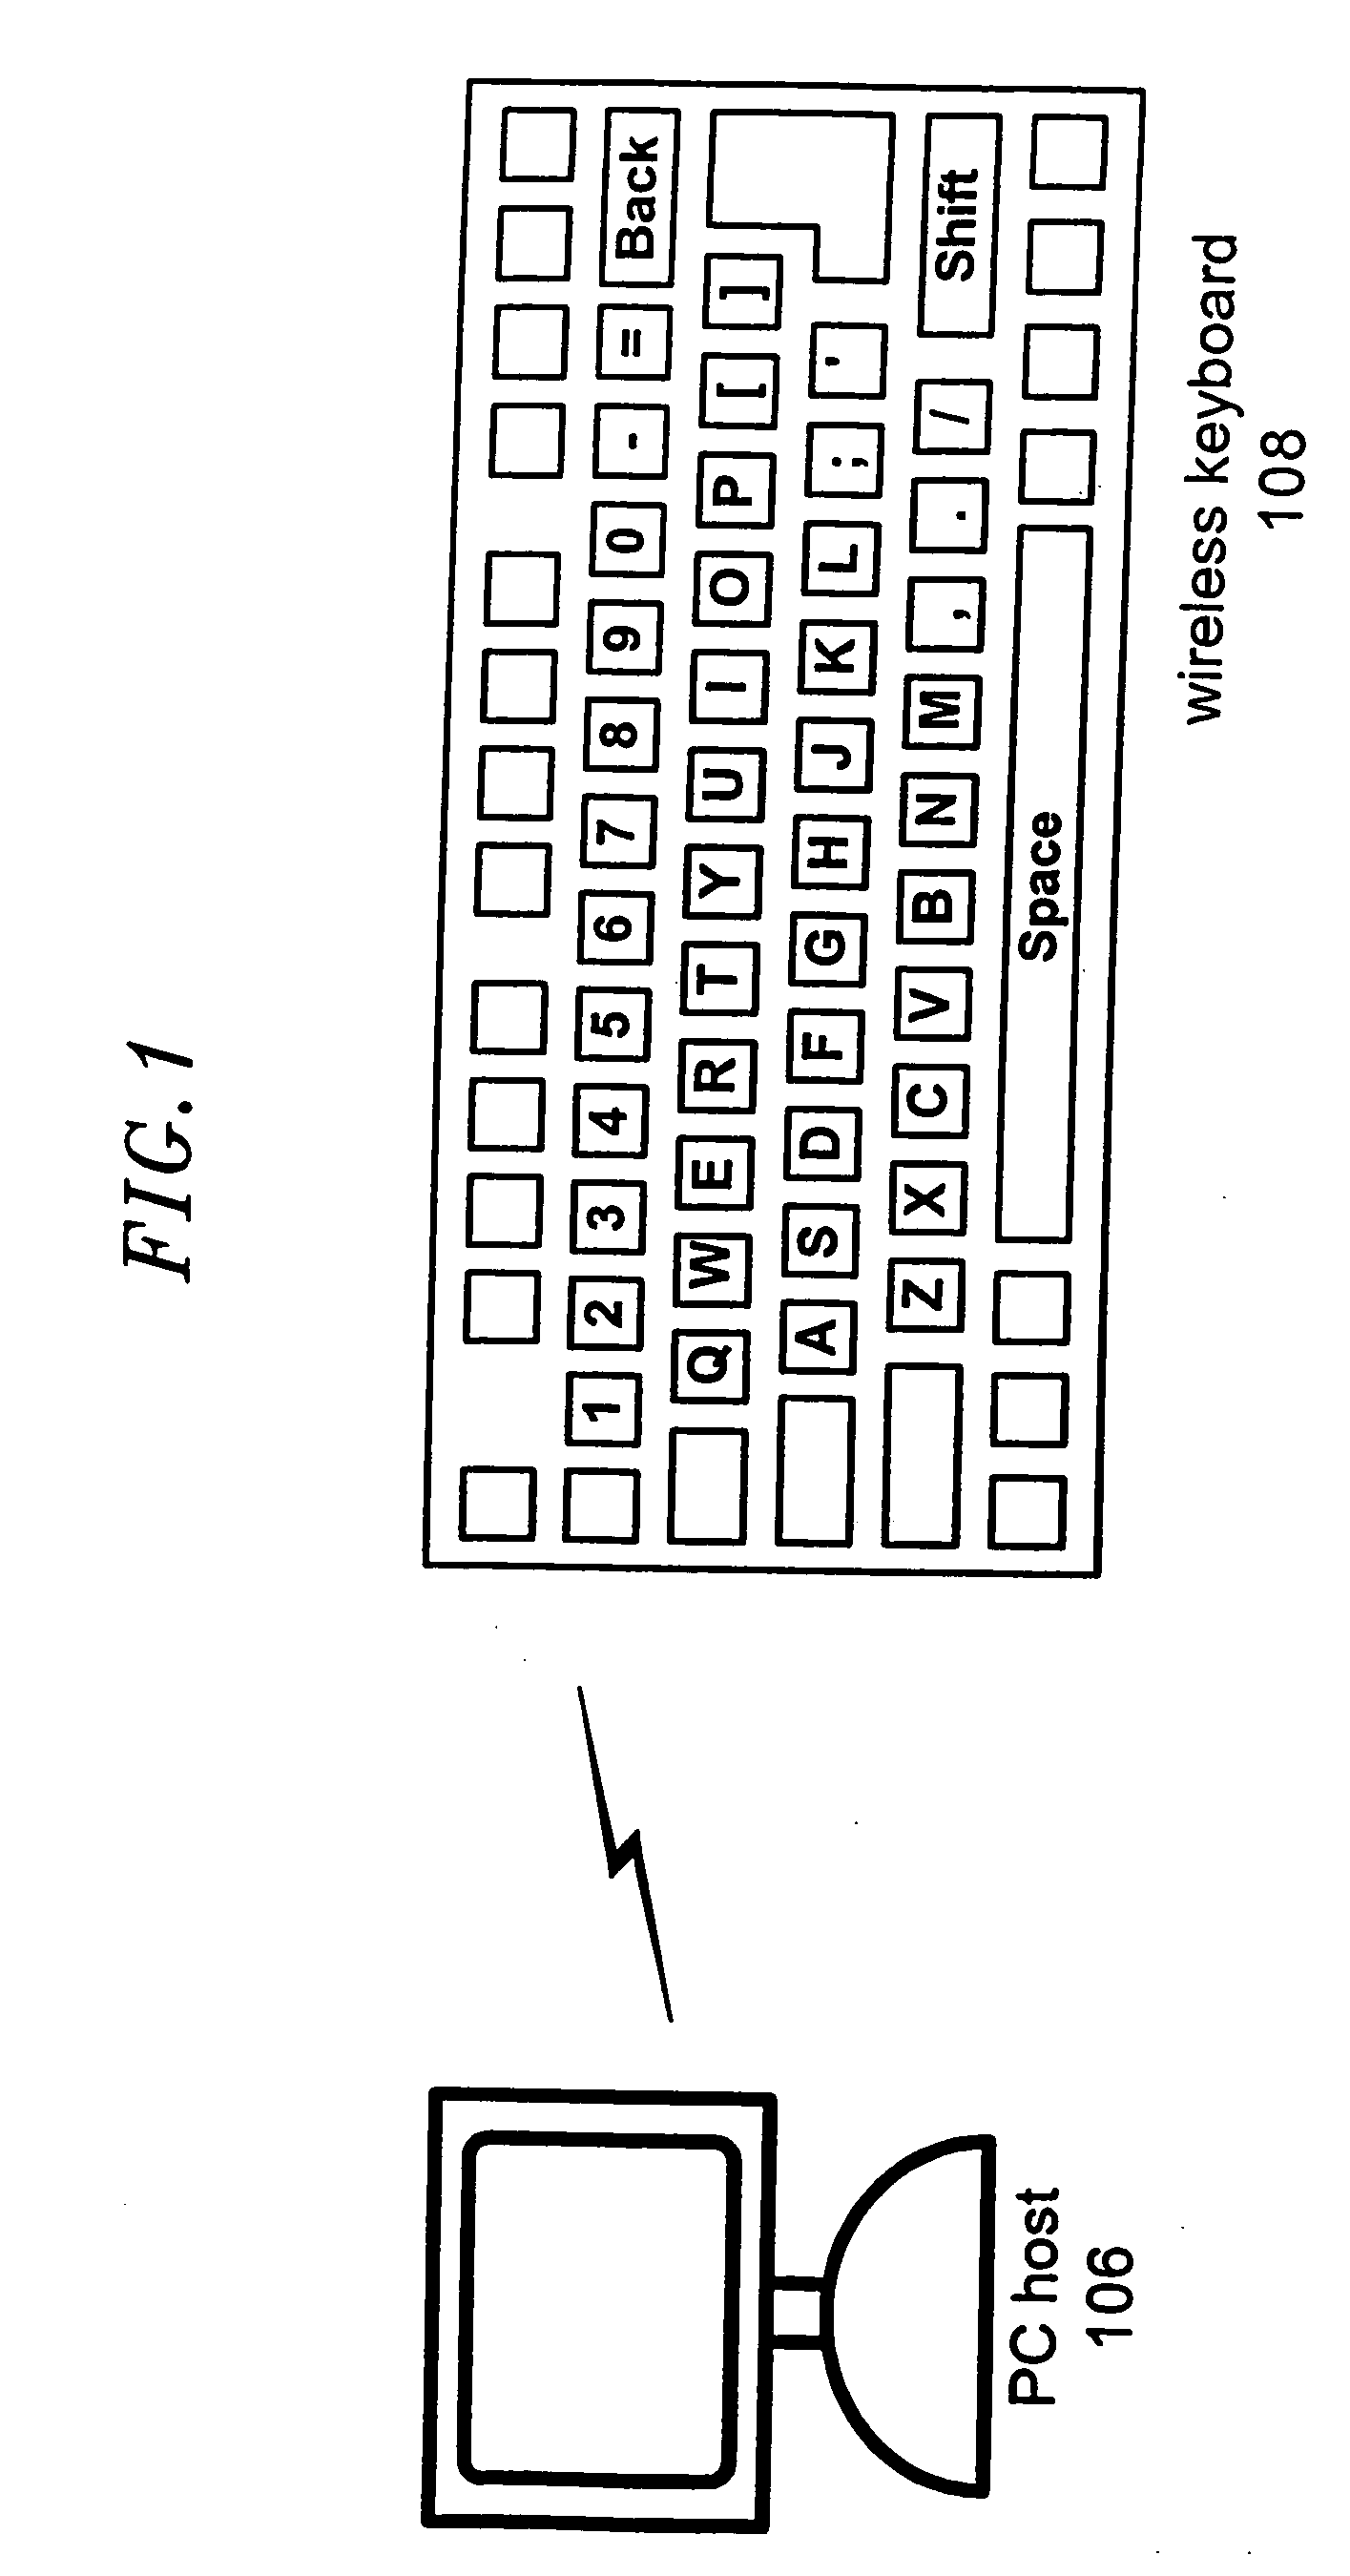 Method and apparatus for high performance key detection with key debounce